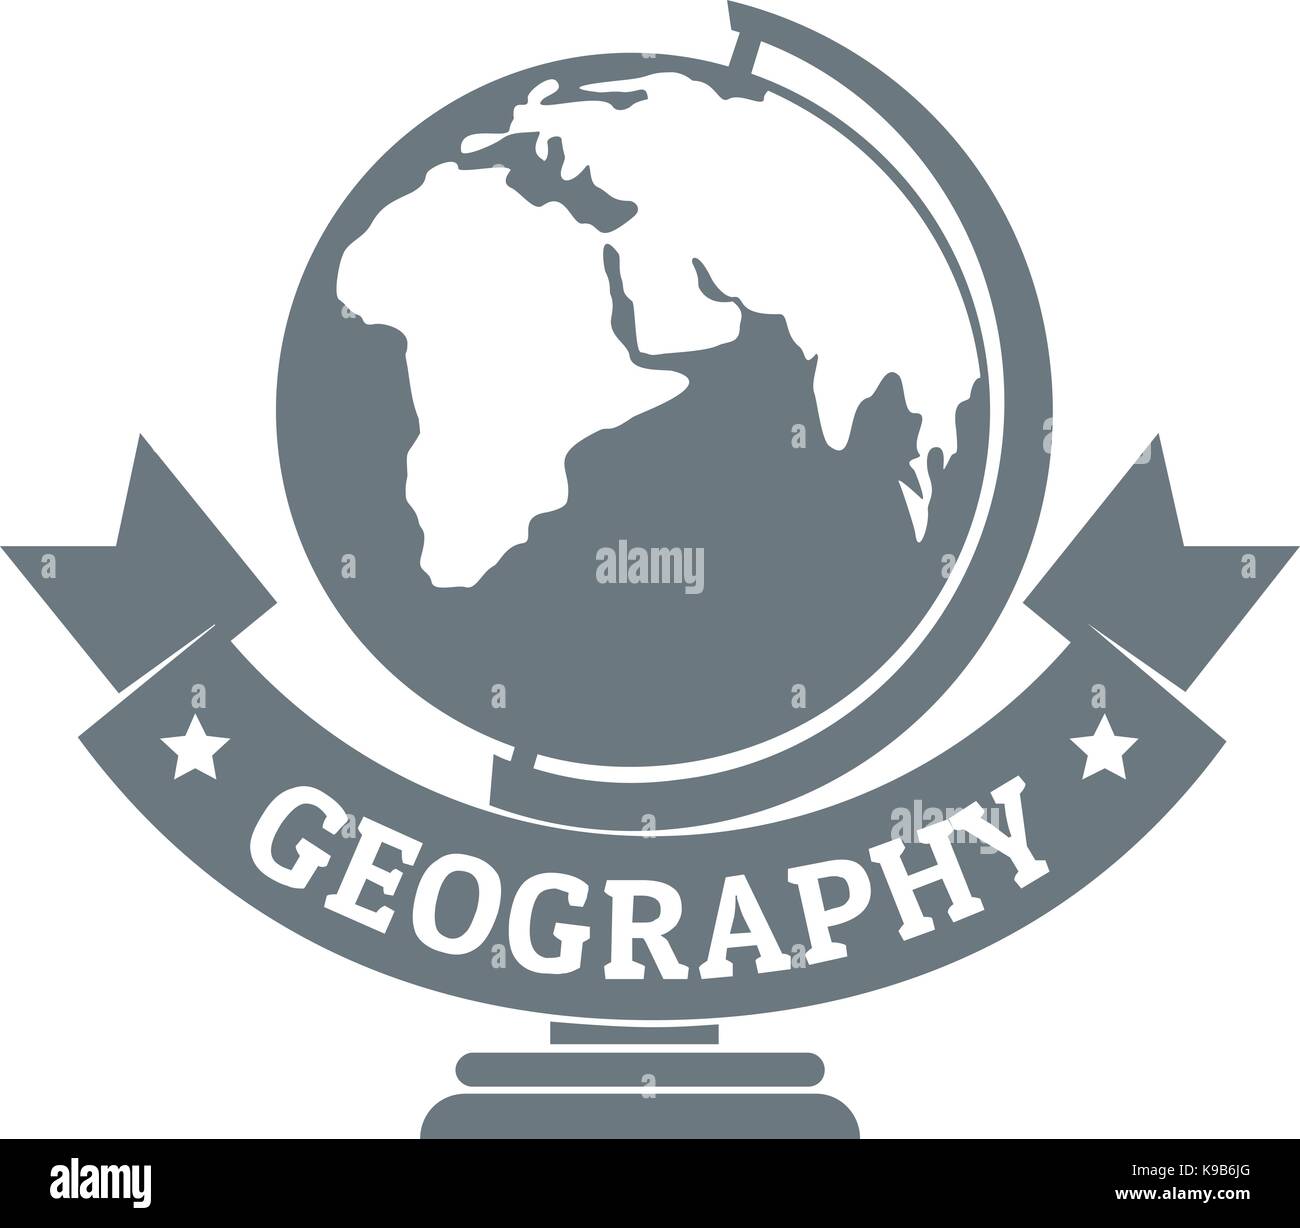 geography project logo